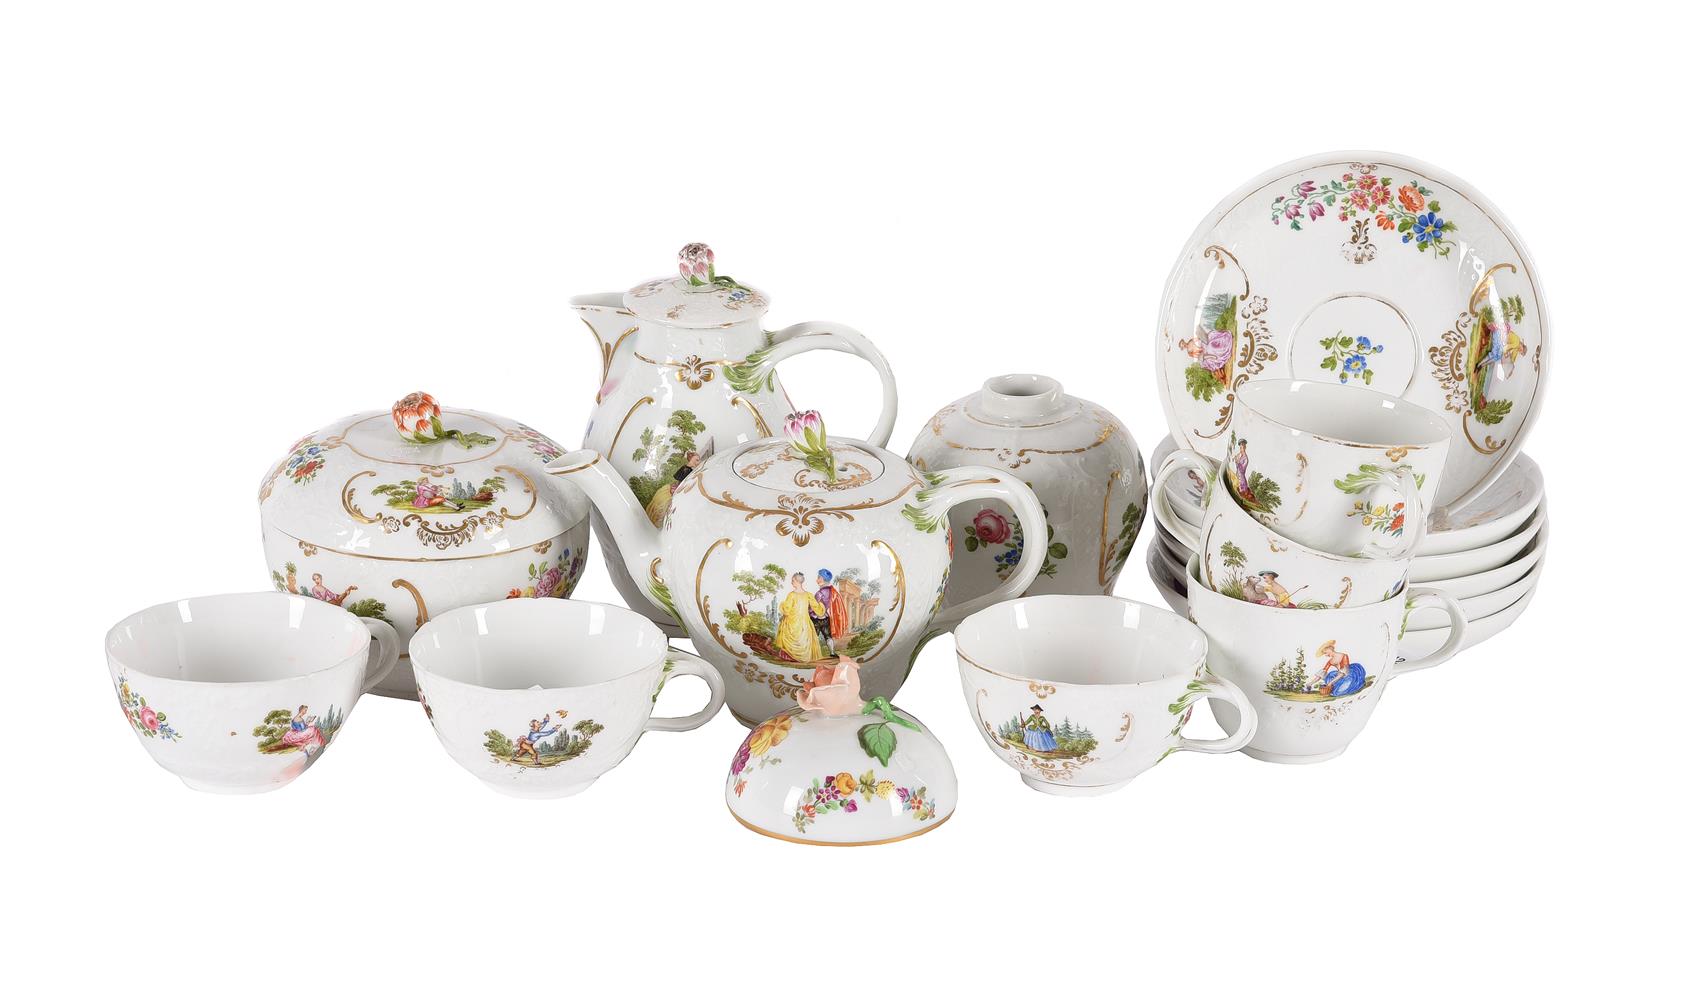 A MEISSEN (PUNKT) PART TEA SERVICE CIRCA 1770Variously painted with Watteauesques